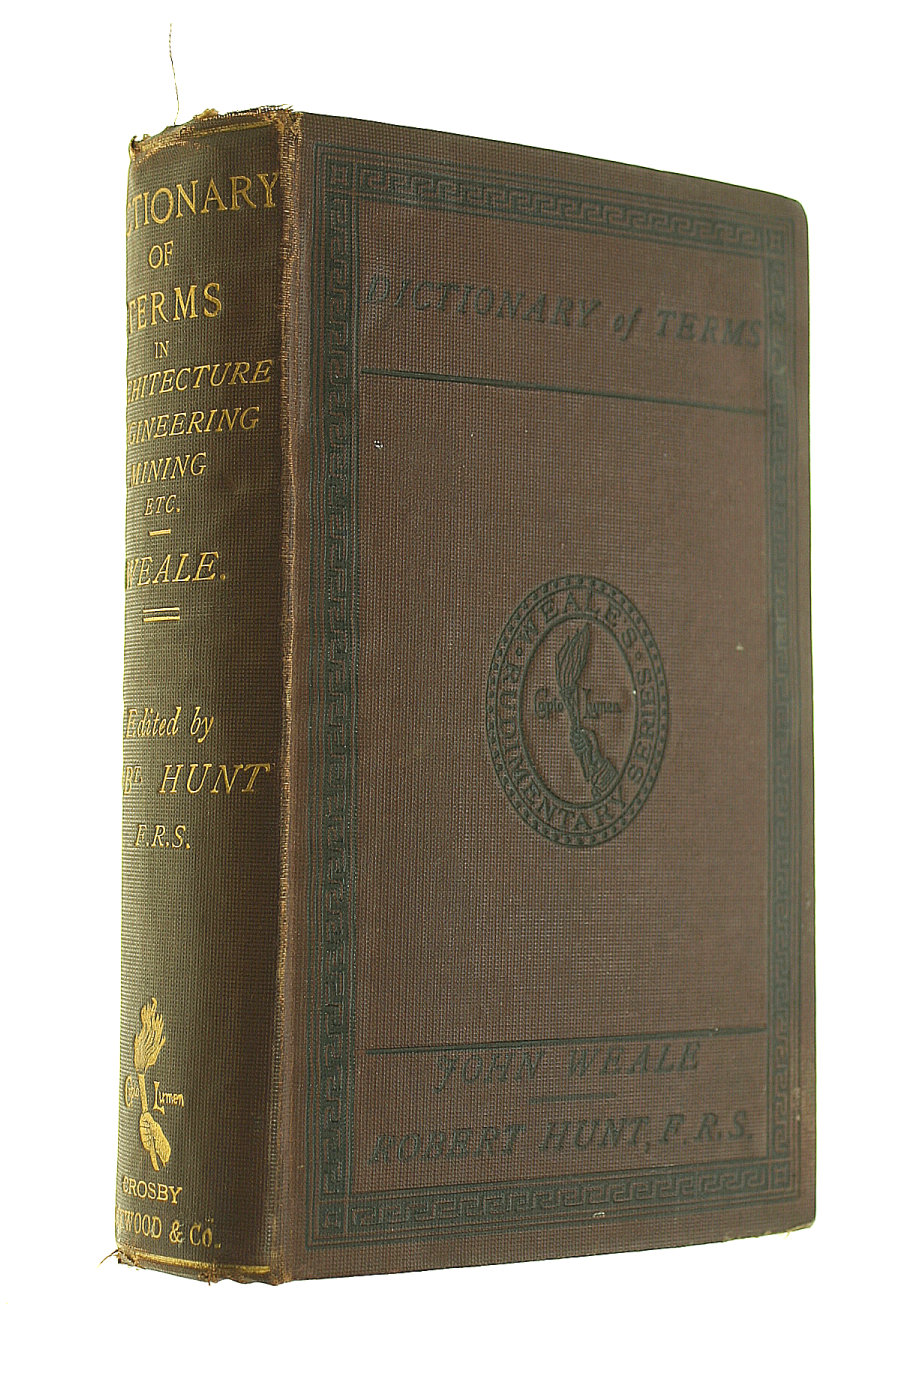 WEALE, JOHN; EDITED WITH NUMEROUS ADDITIONS BY ROBERT HUNT - A Dictionary of Terms Used in Architecture, Building, Engineering, Mining, Metallurgy, Archaeology, The Fine Arts Etc.